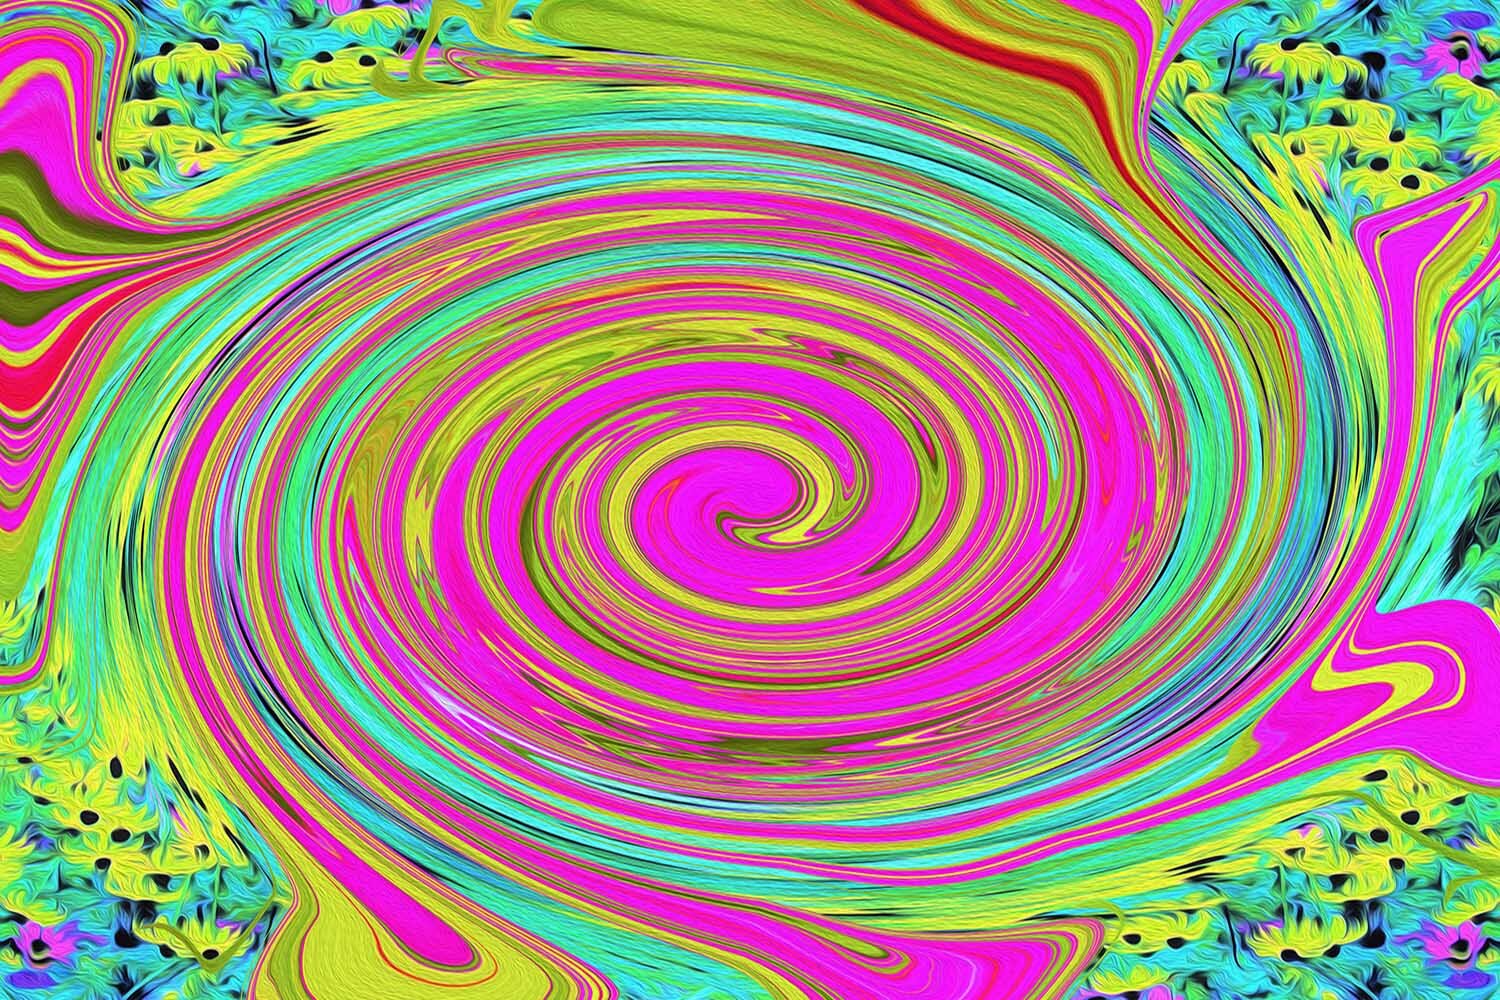 Groovy Abstract Pink and Turquoise Swirl with Flowers